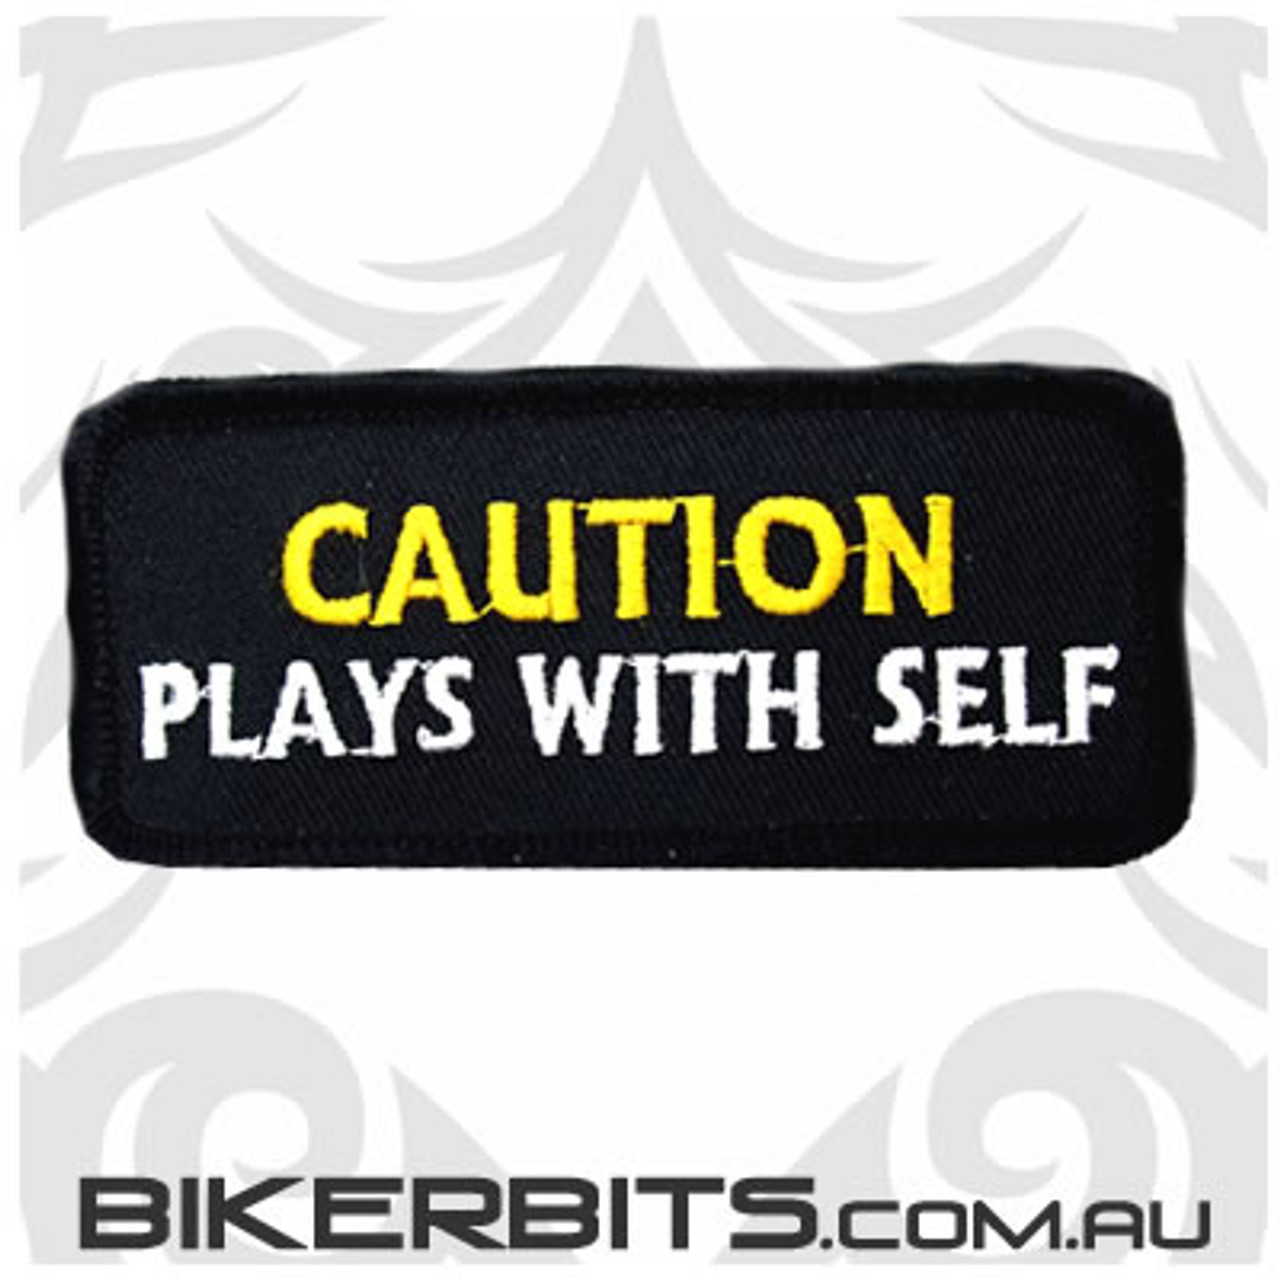 CAUTION PLAYS WITH SELF Patch